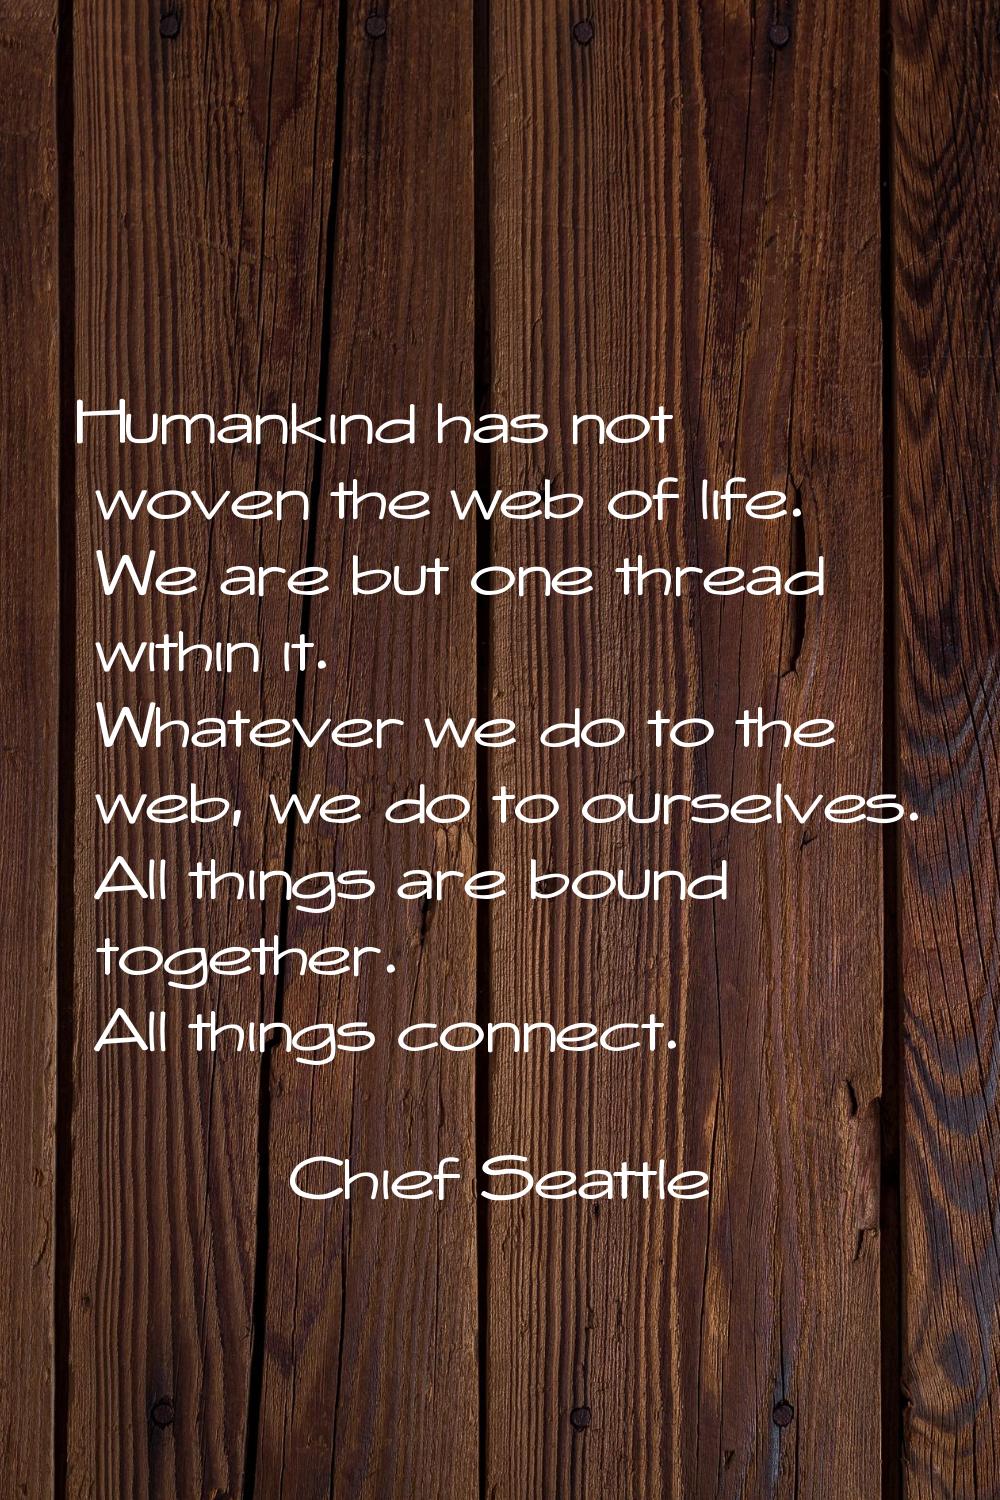 Humankind has not woven the web of life. We are but one thread within it. Whatever we do to the web